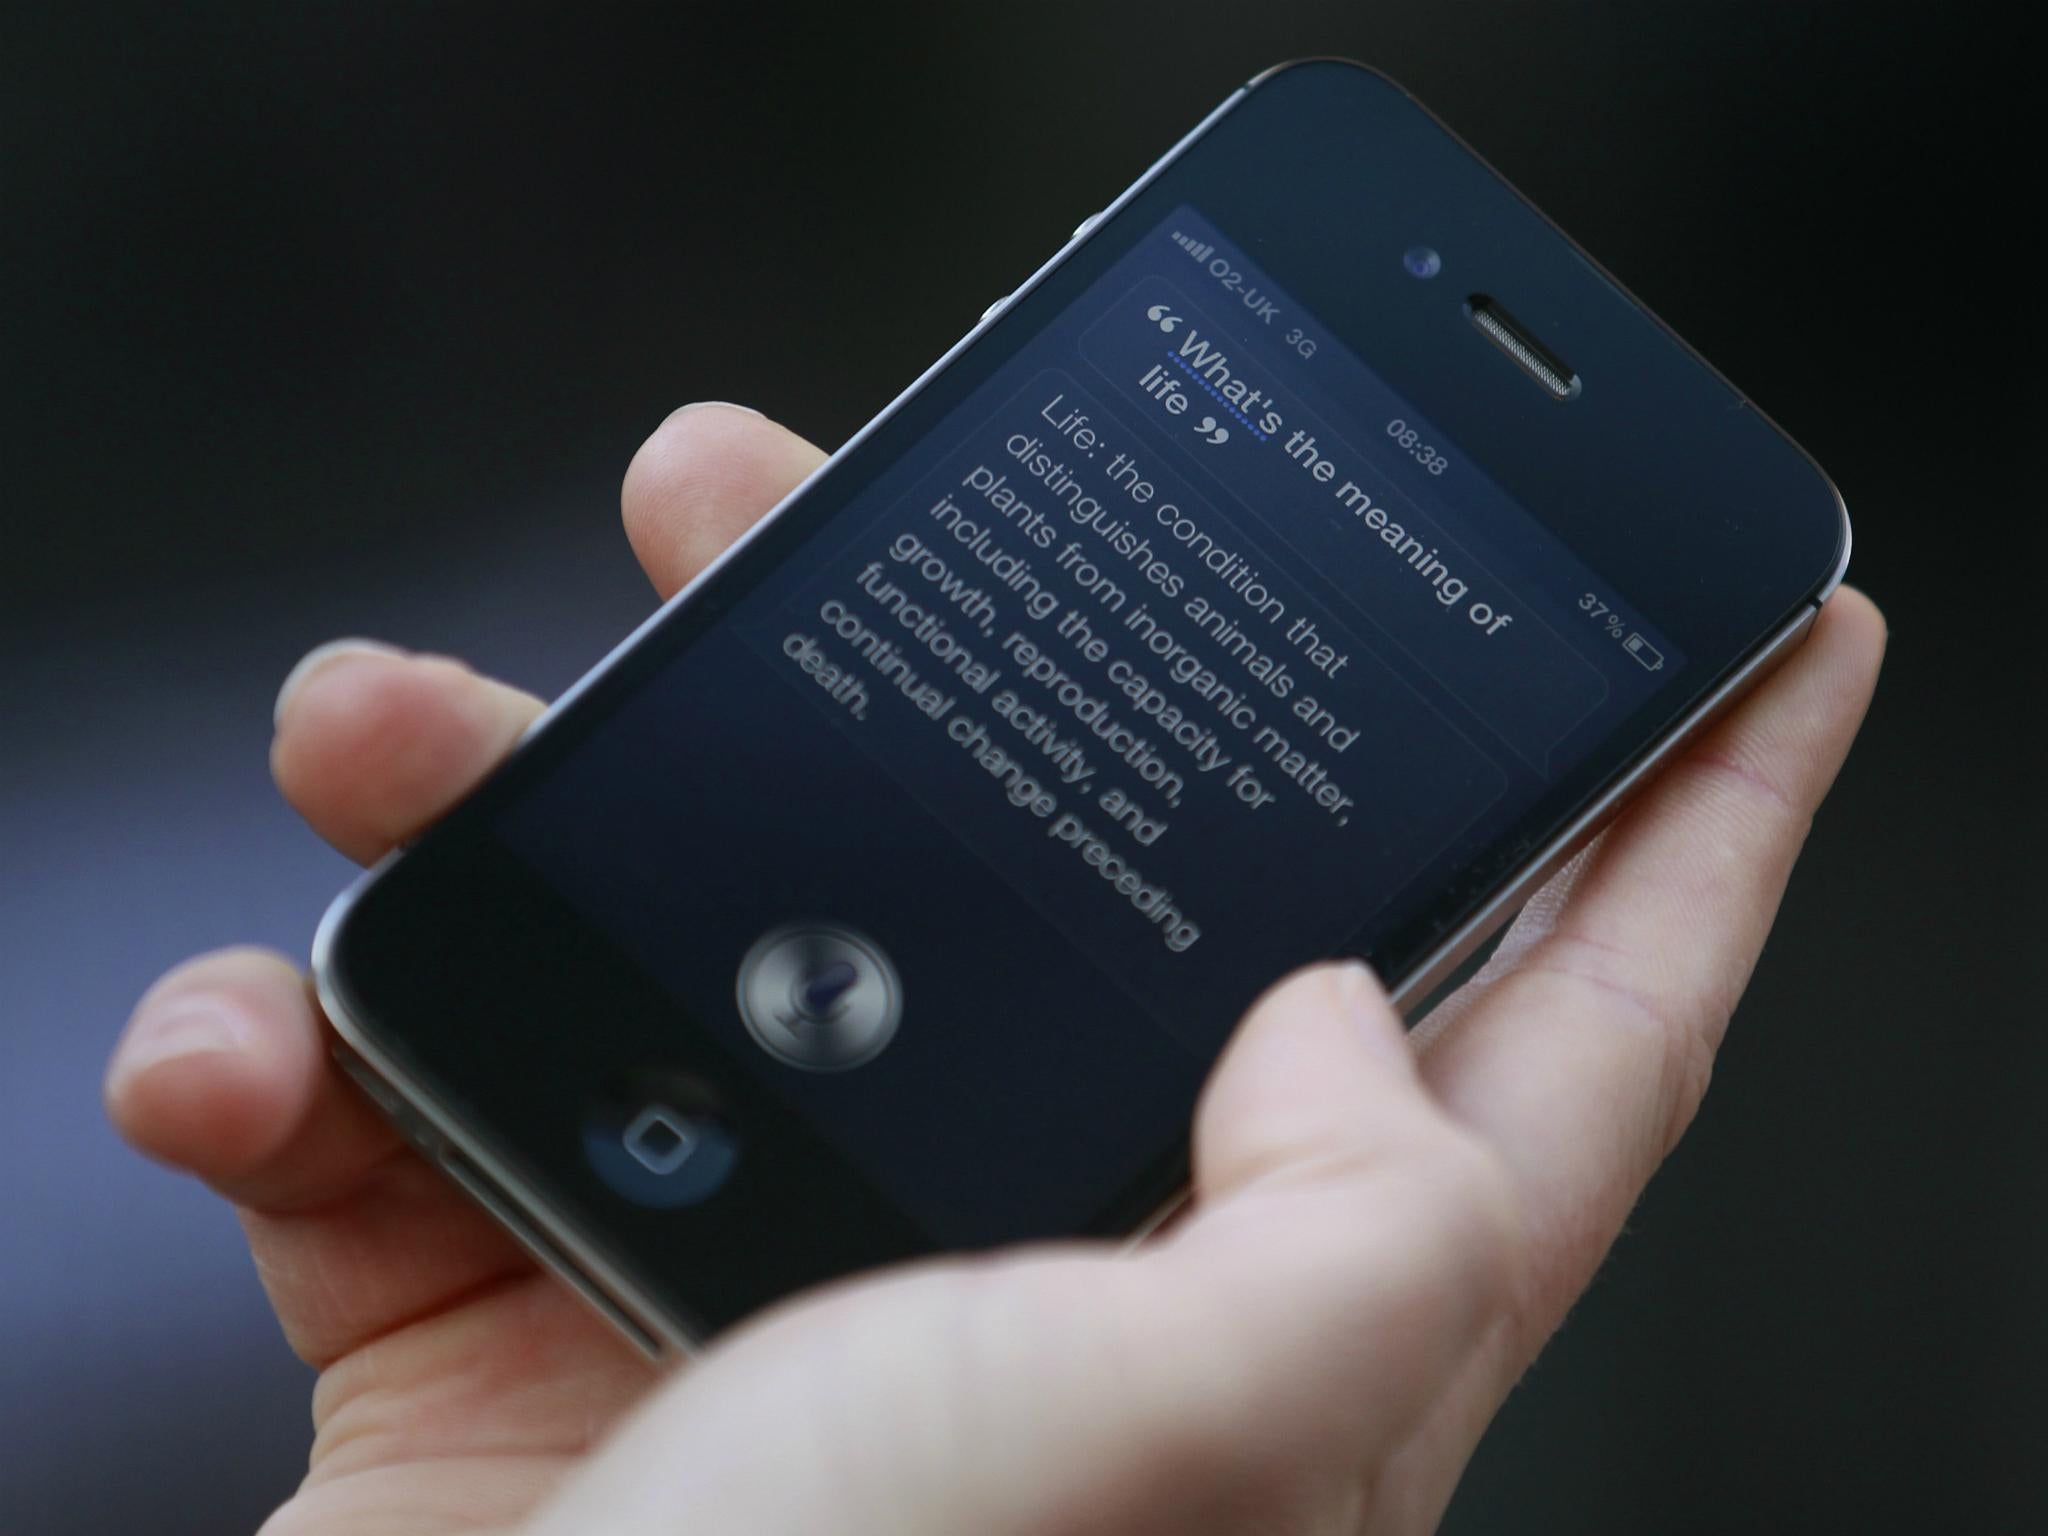 Iphone Siri Prank Tricks People Into Phoning Emergency Services The Independent The Independent - roblox id codes pls call 911